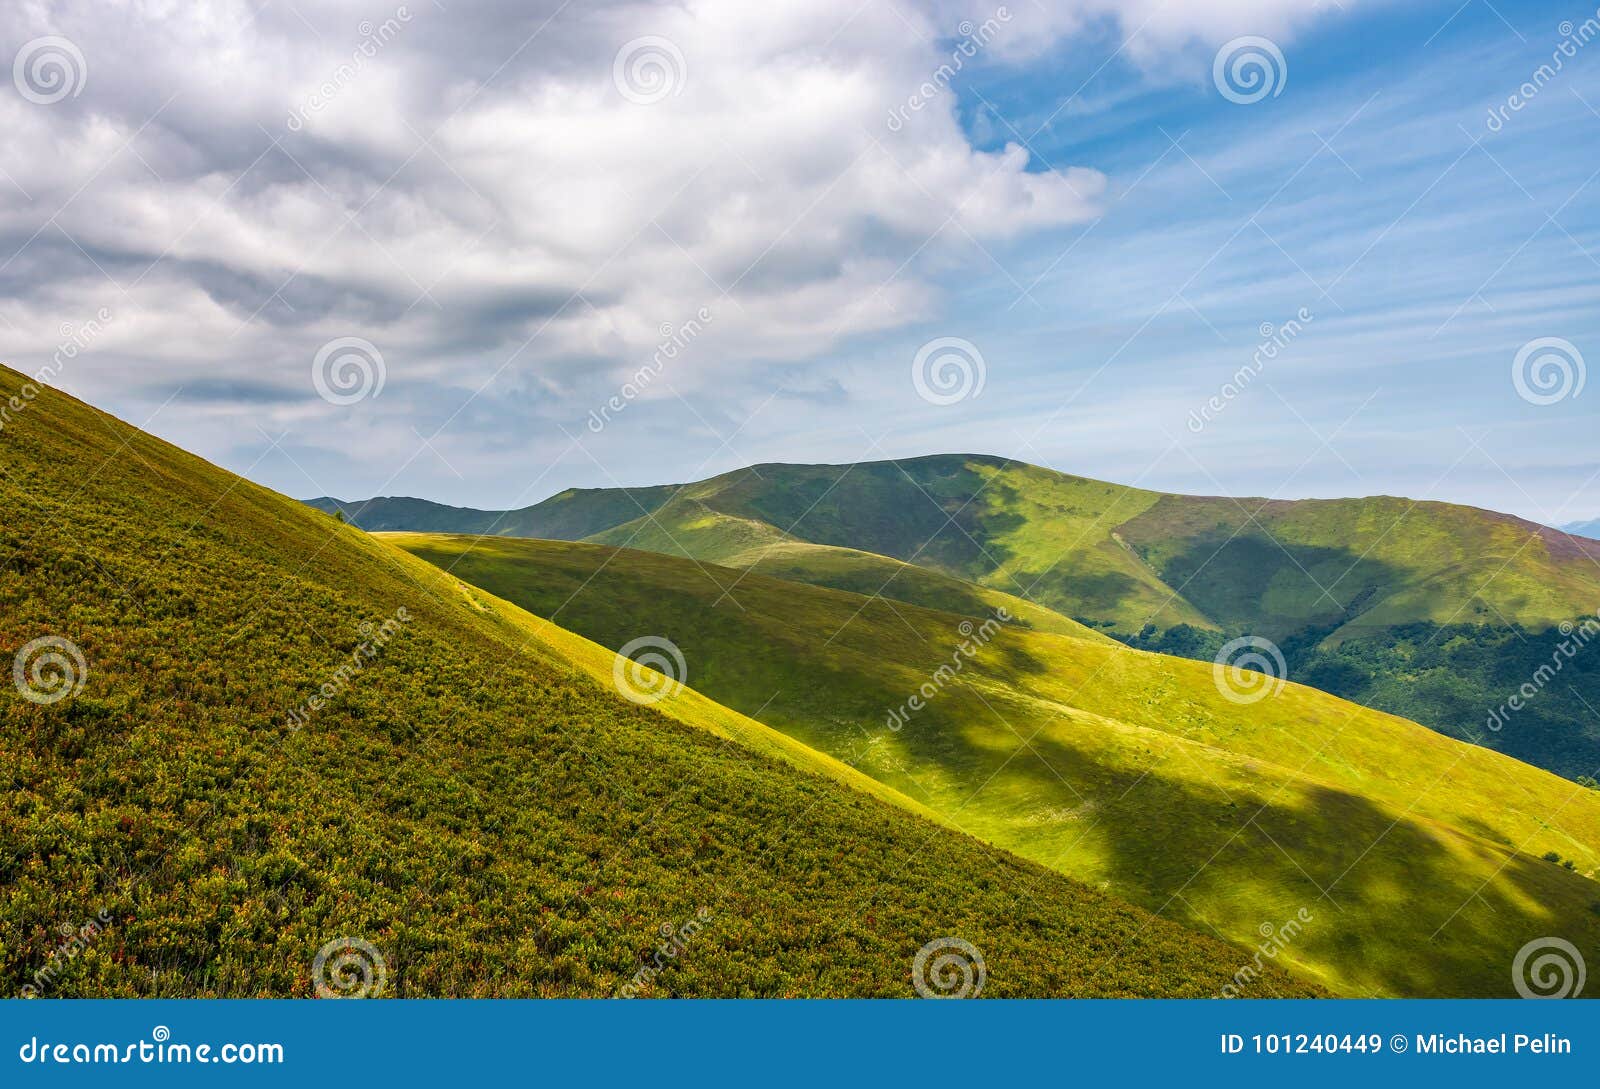 Gorgeous Green Rolling Hill in Summer Stock Image - Image of hillside